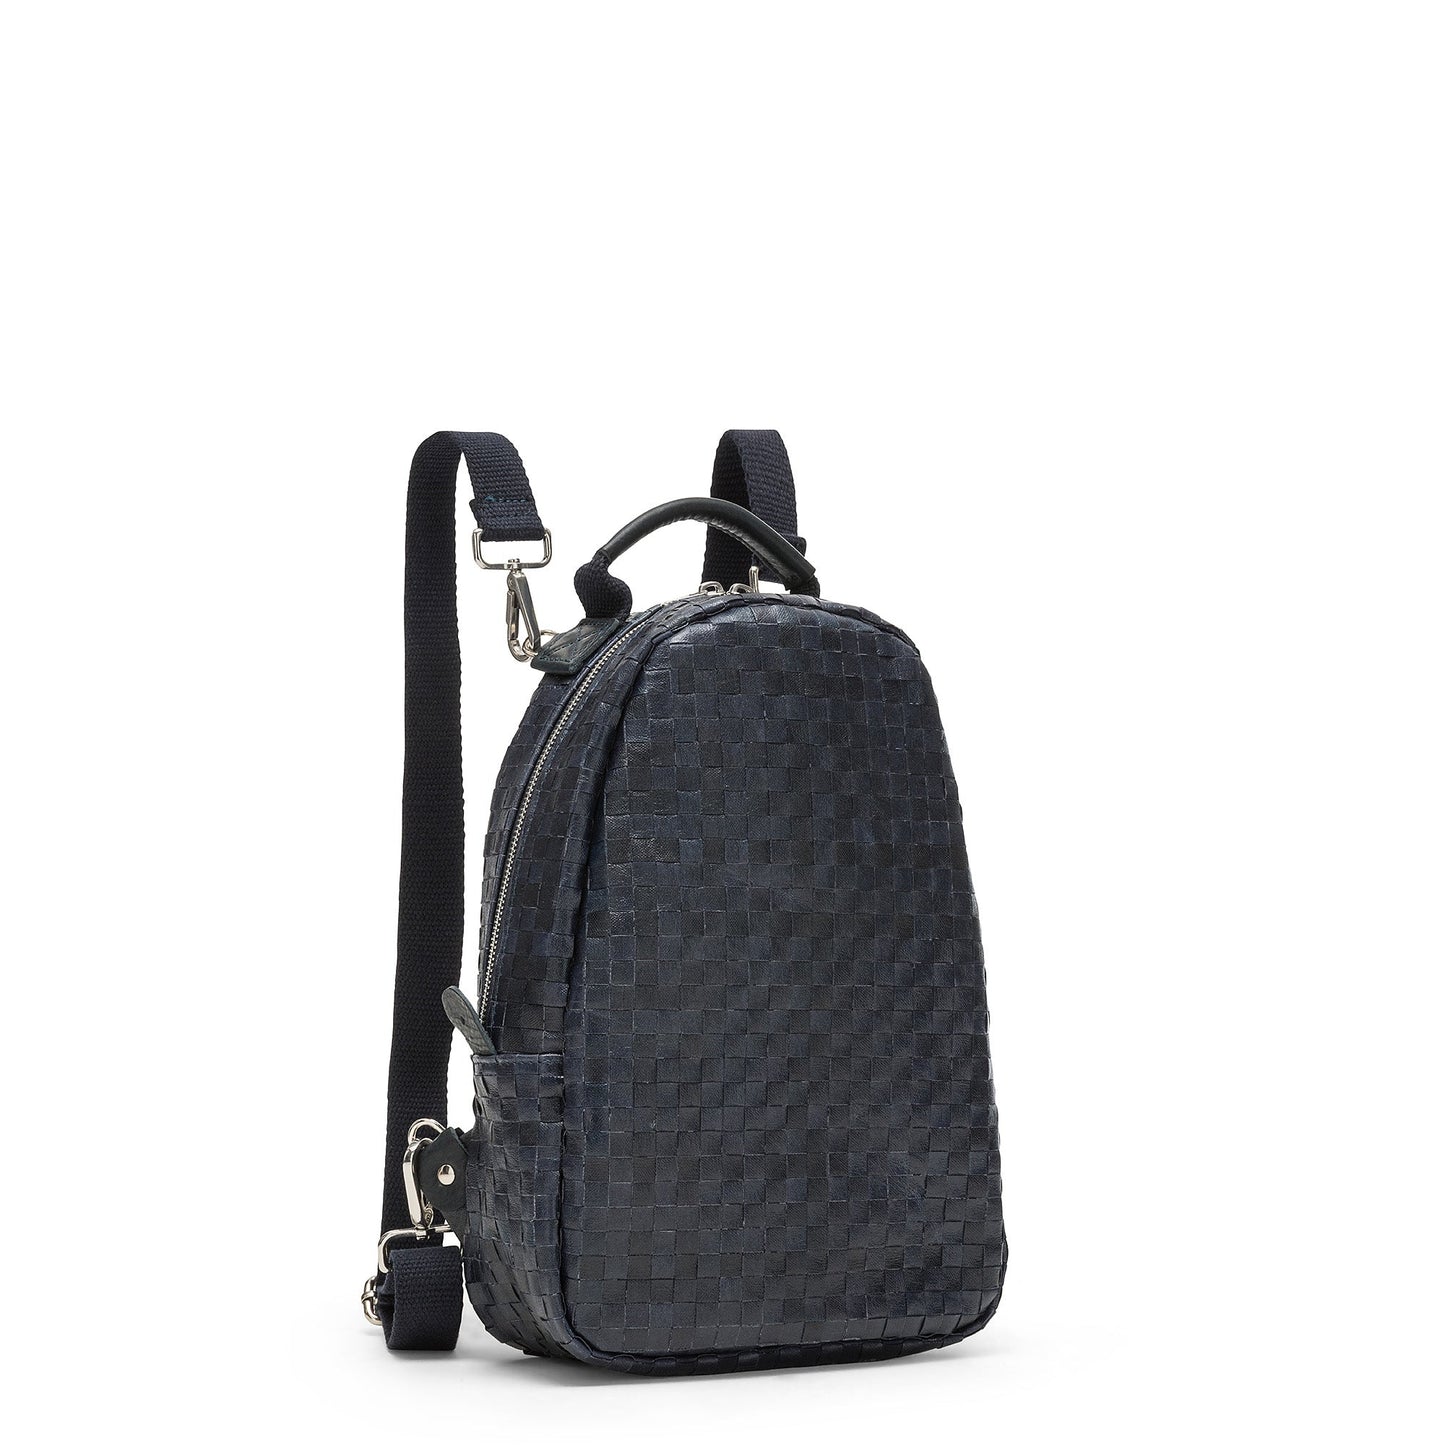 A woven washable paper backpack is shown in black. It has a rounded shape, a top handle, a side pocket, and two long shoulder straps. 